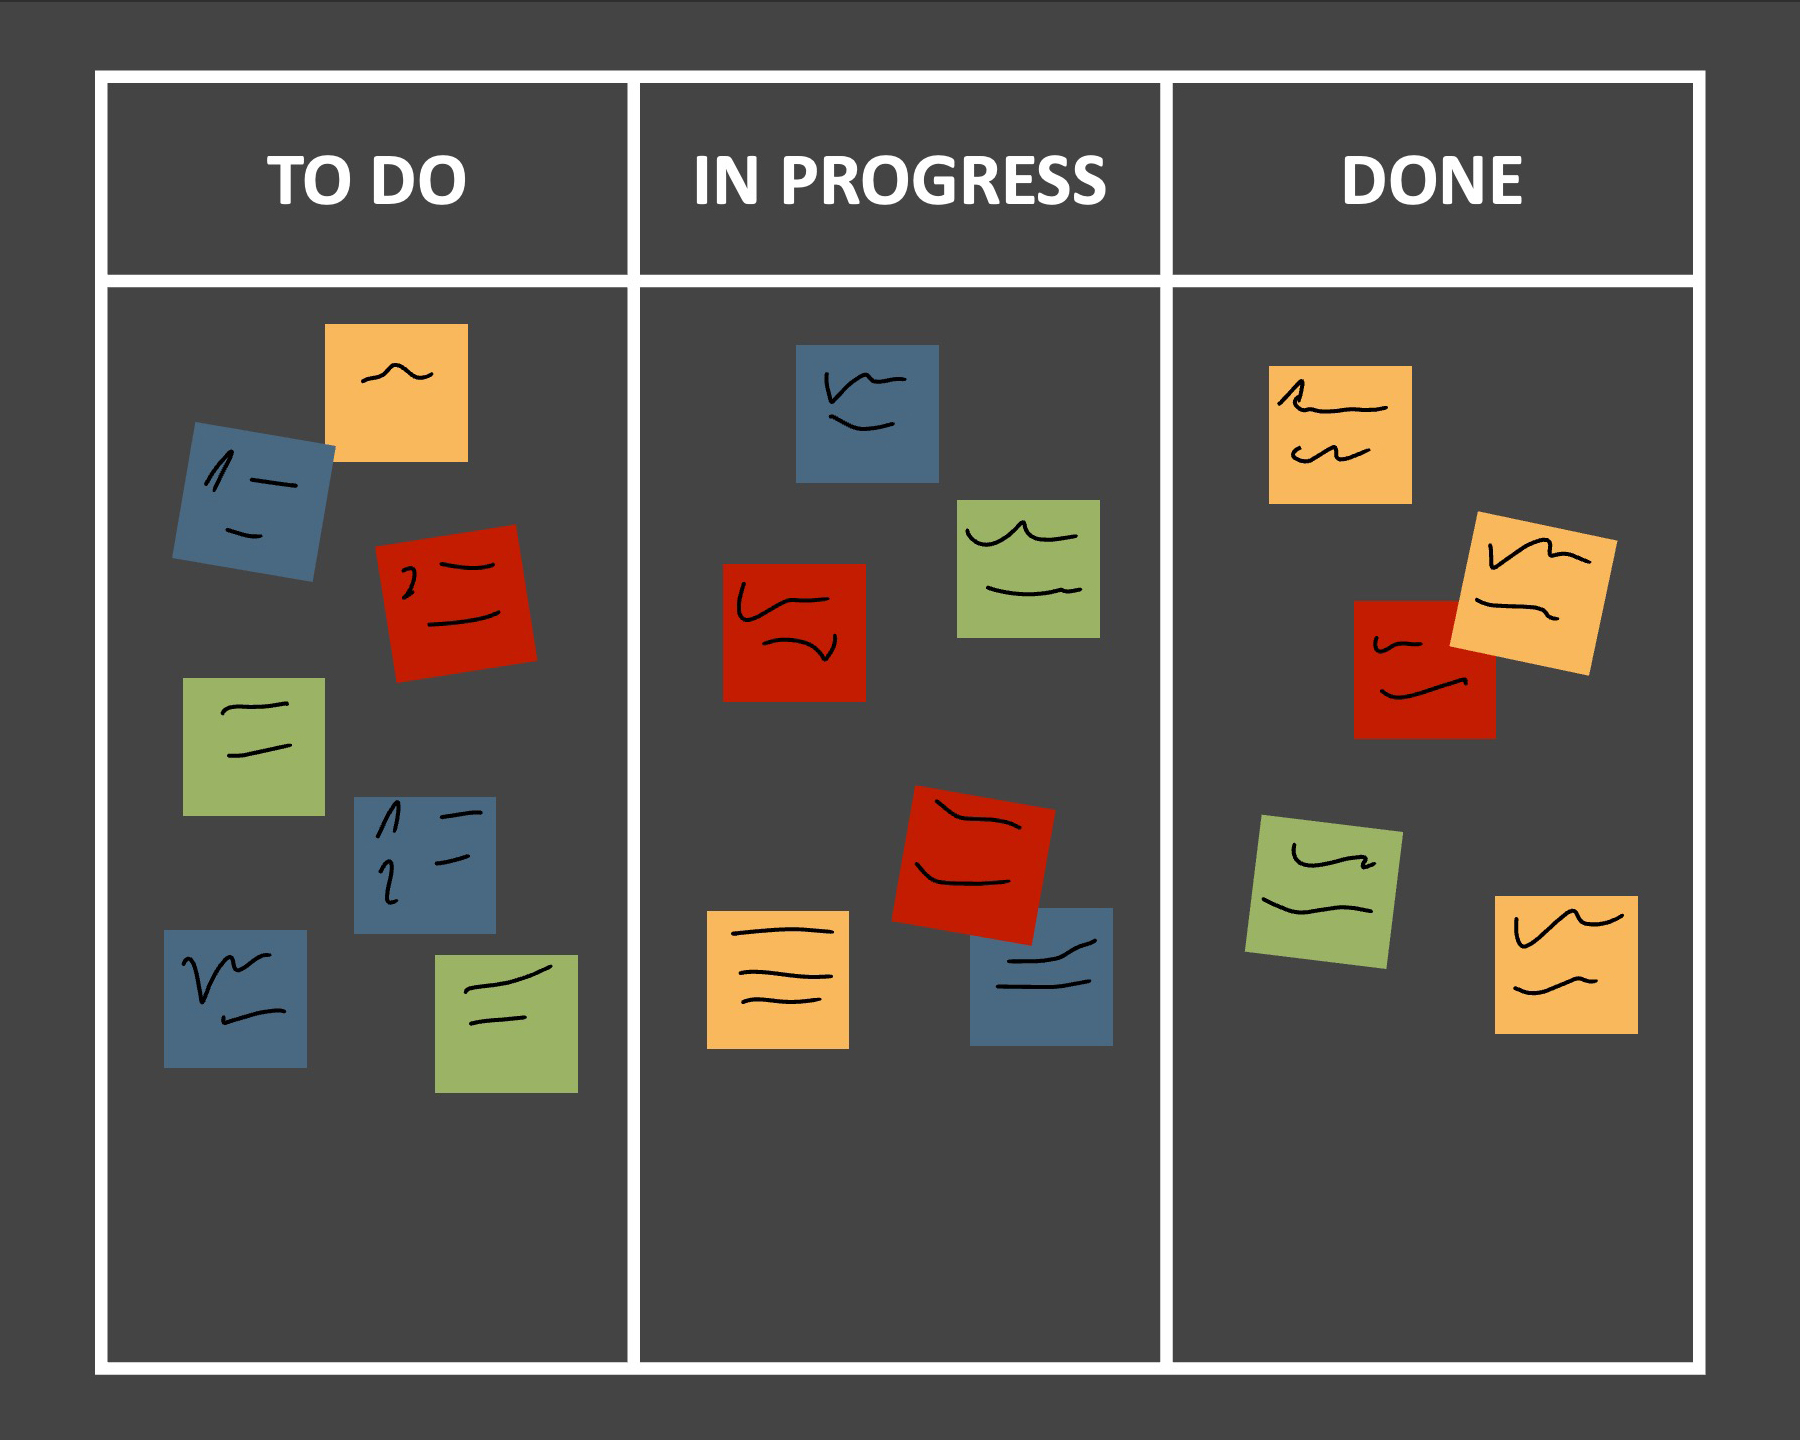 The Kanban board visualizes the individual work steps.